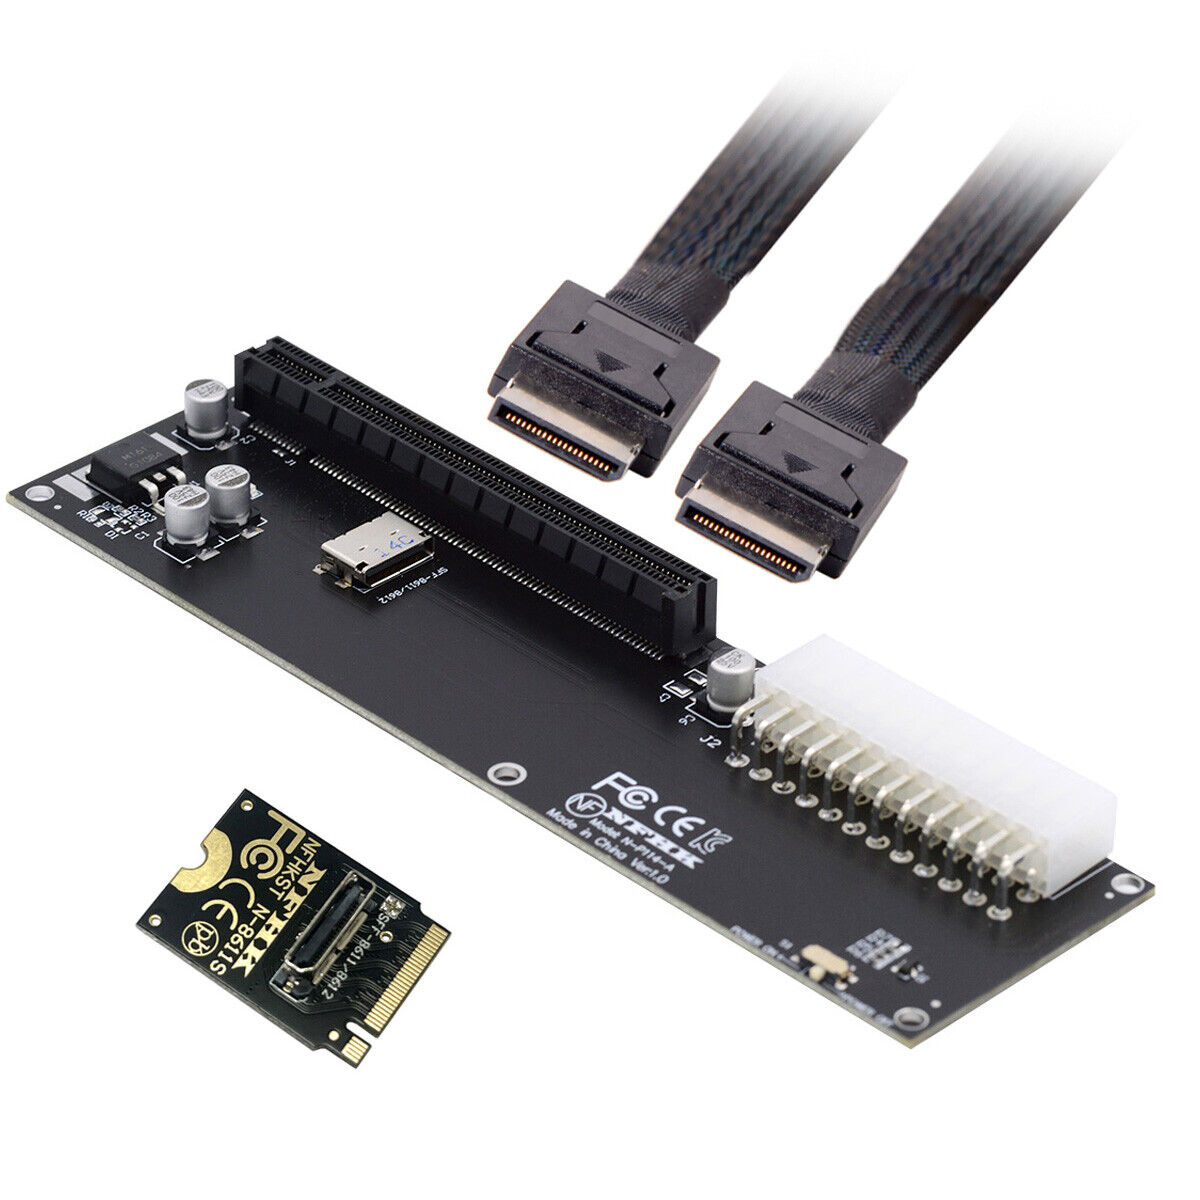 Cablecc Oculink to PCIE 4.0 M.2 M-key to SFF-8611 Host Adapter for GPD WIN Max2